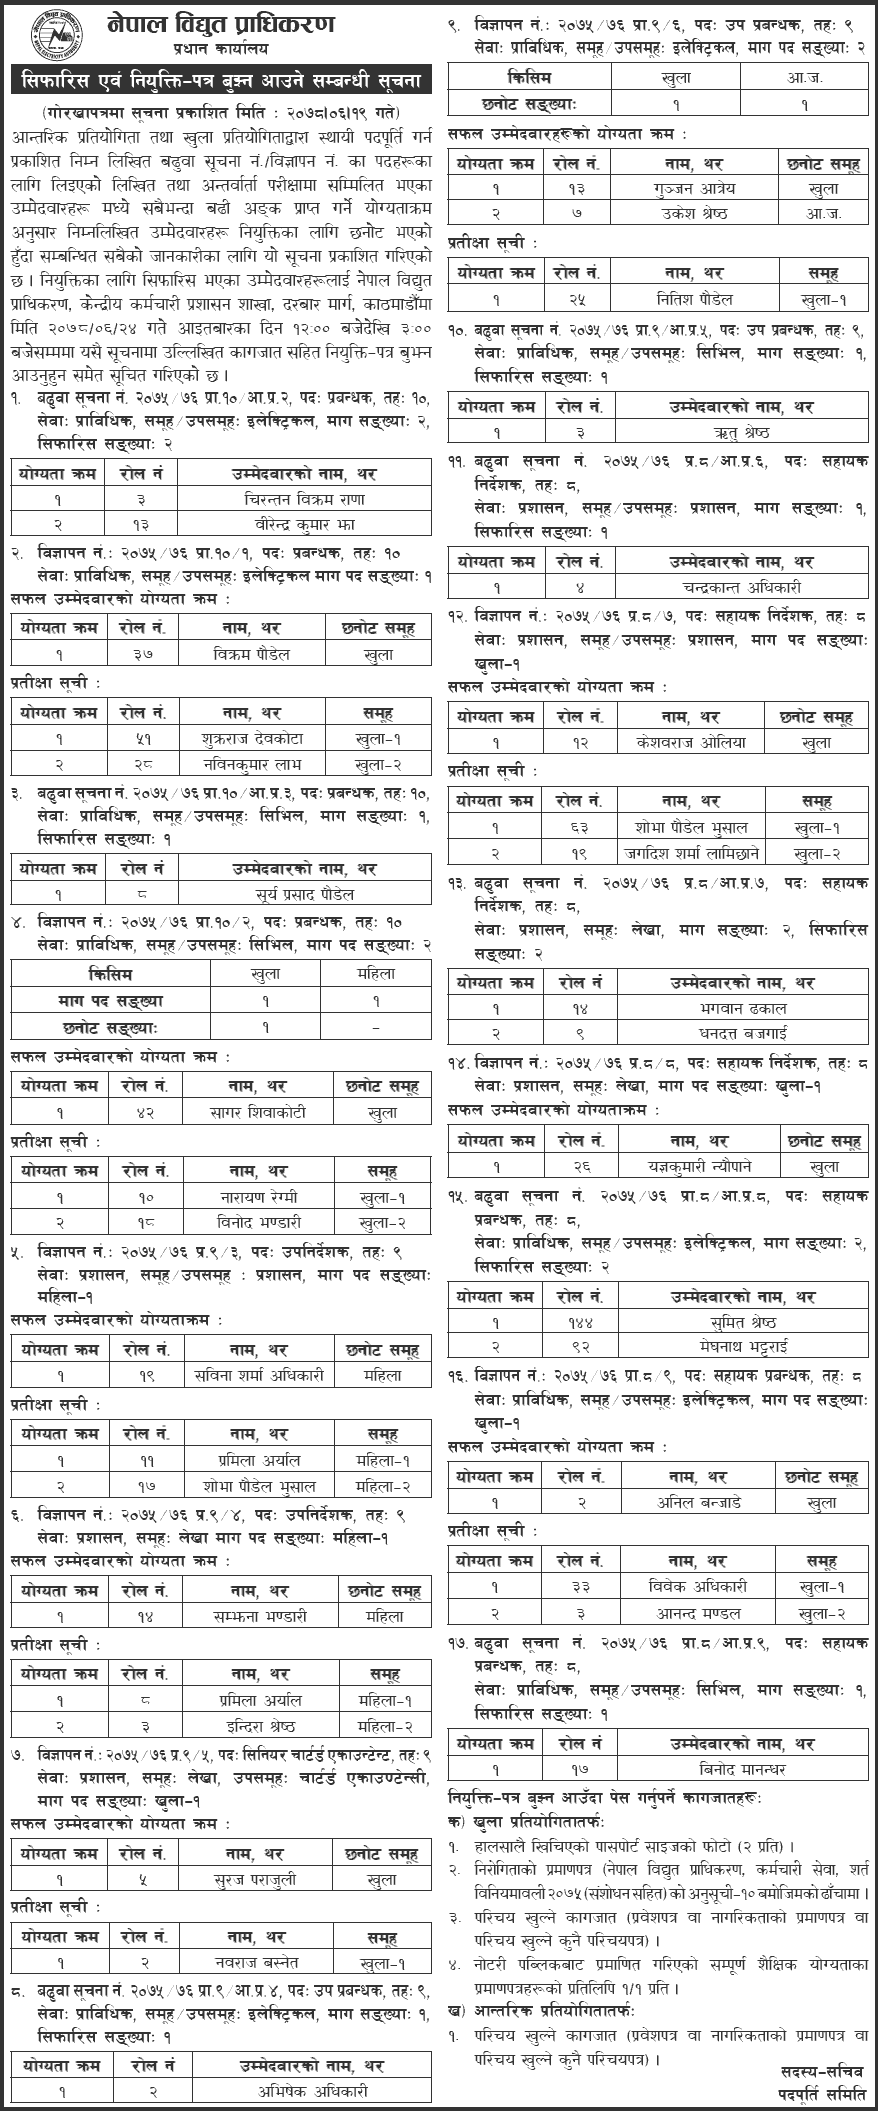 Nepal Electricity Authority (NEA) Final Result of Various Positions